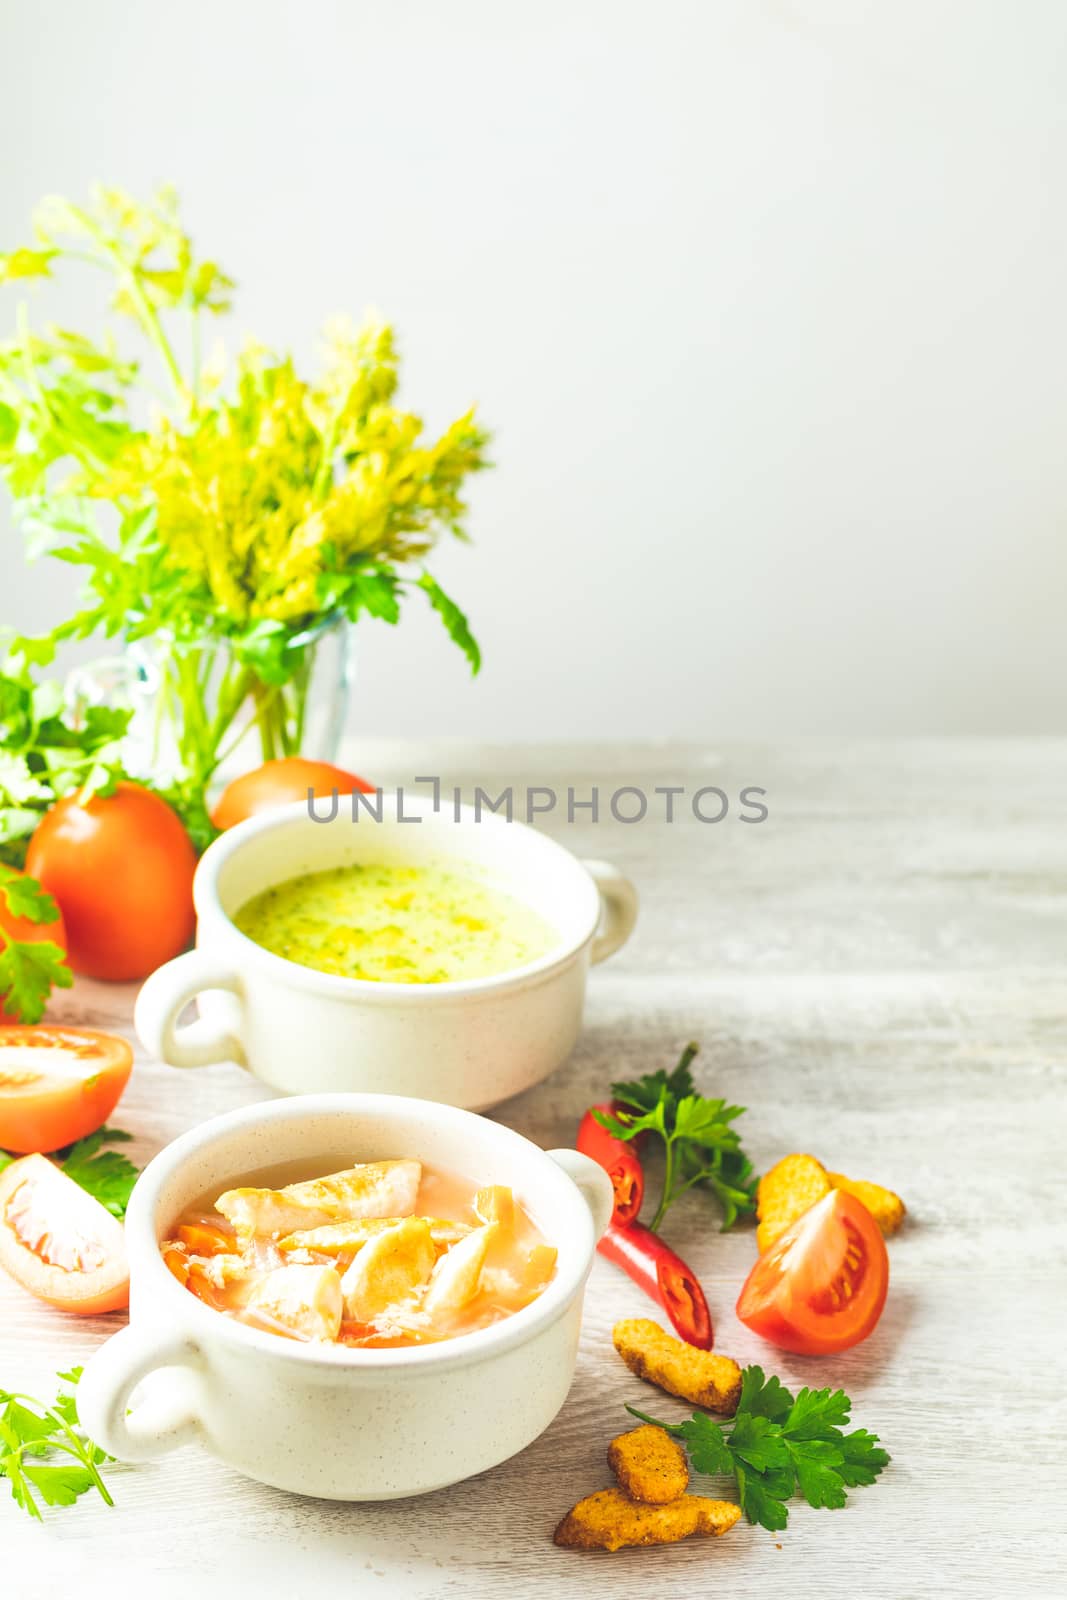 Concept of healthy vegetable and legume soups by ArtSvitlyna